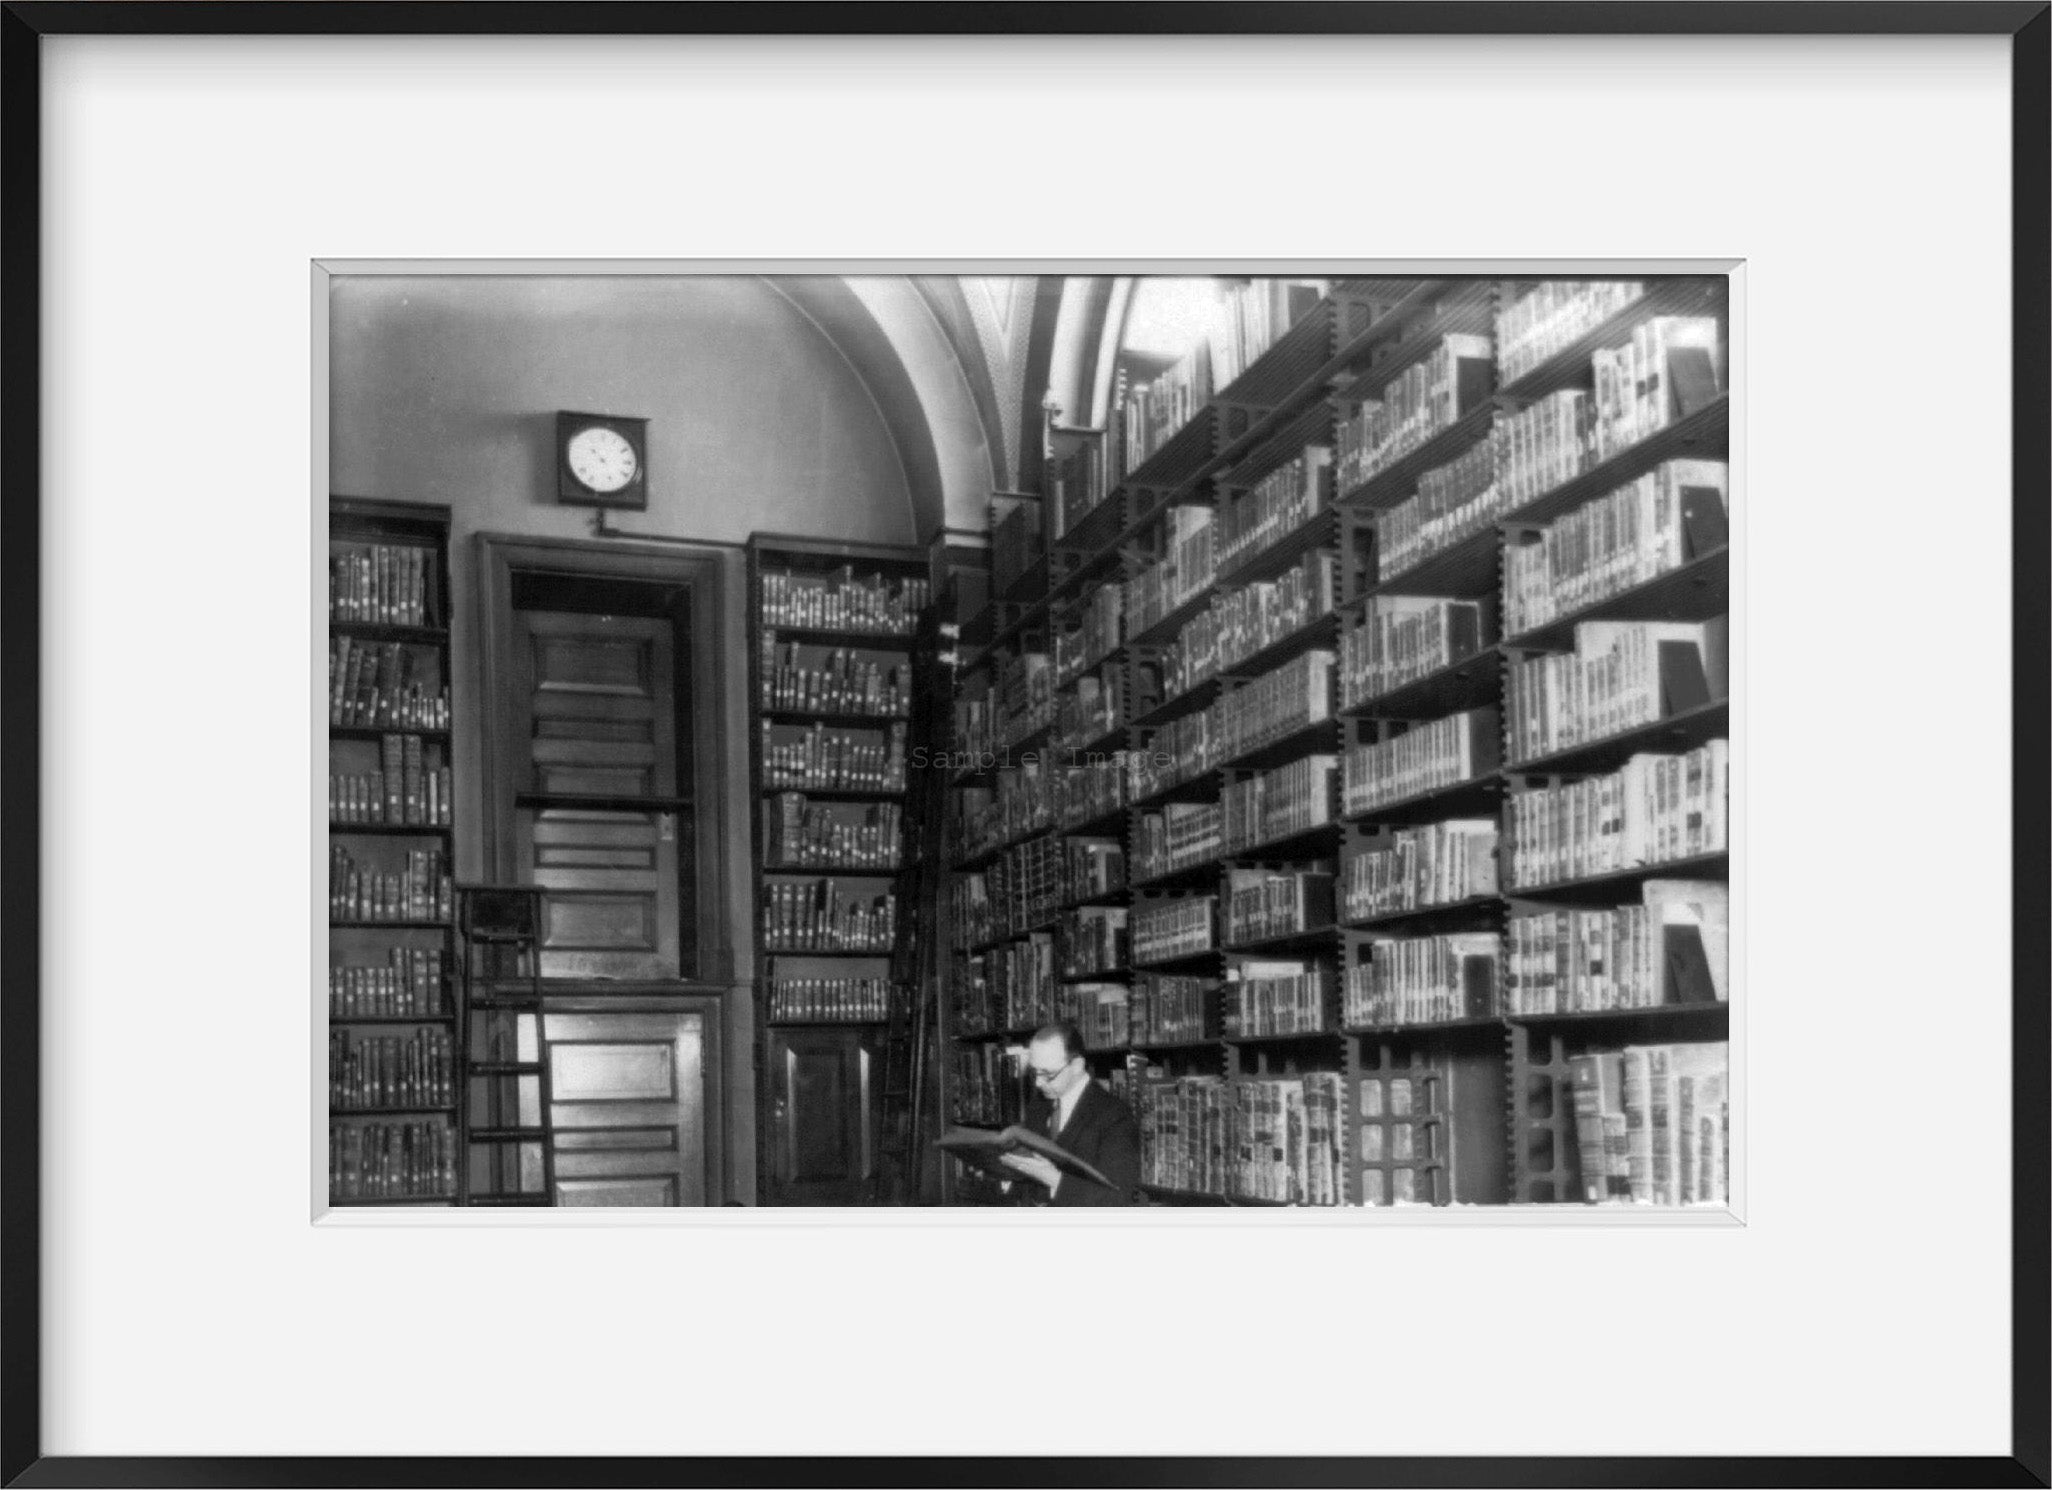 1920 Photo One of the stacks in the Library of Congress, Washington, D.C.